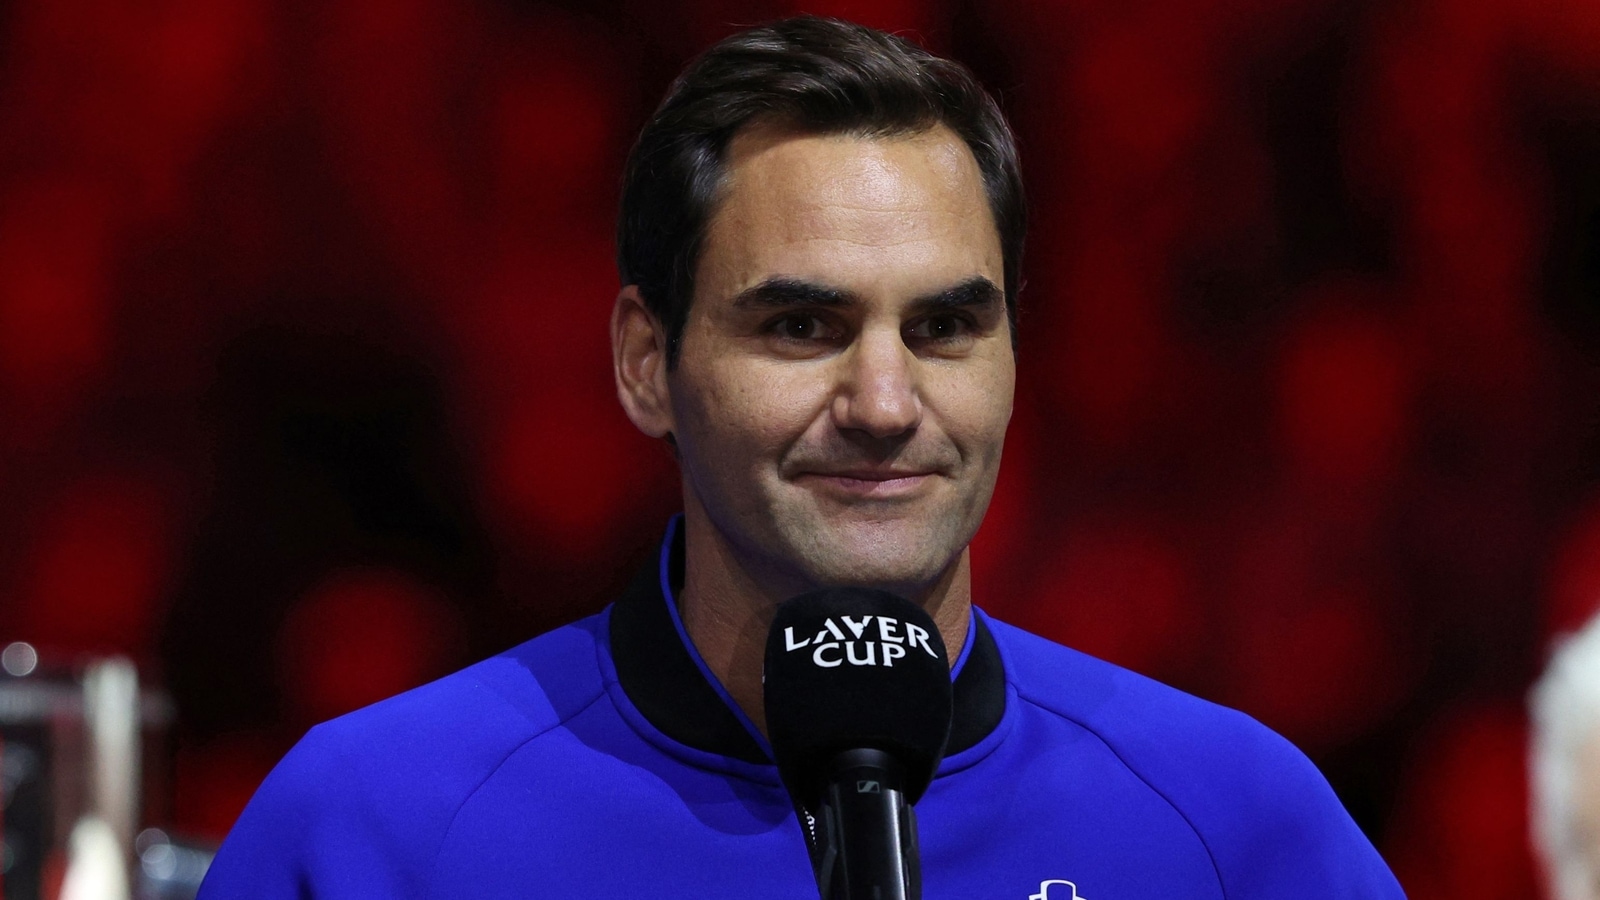 Roger Federer drops massive hint on possible Laver Cup return in 2023 after retirement from tennis